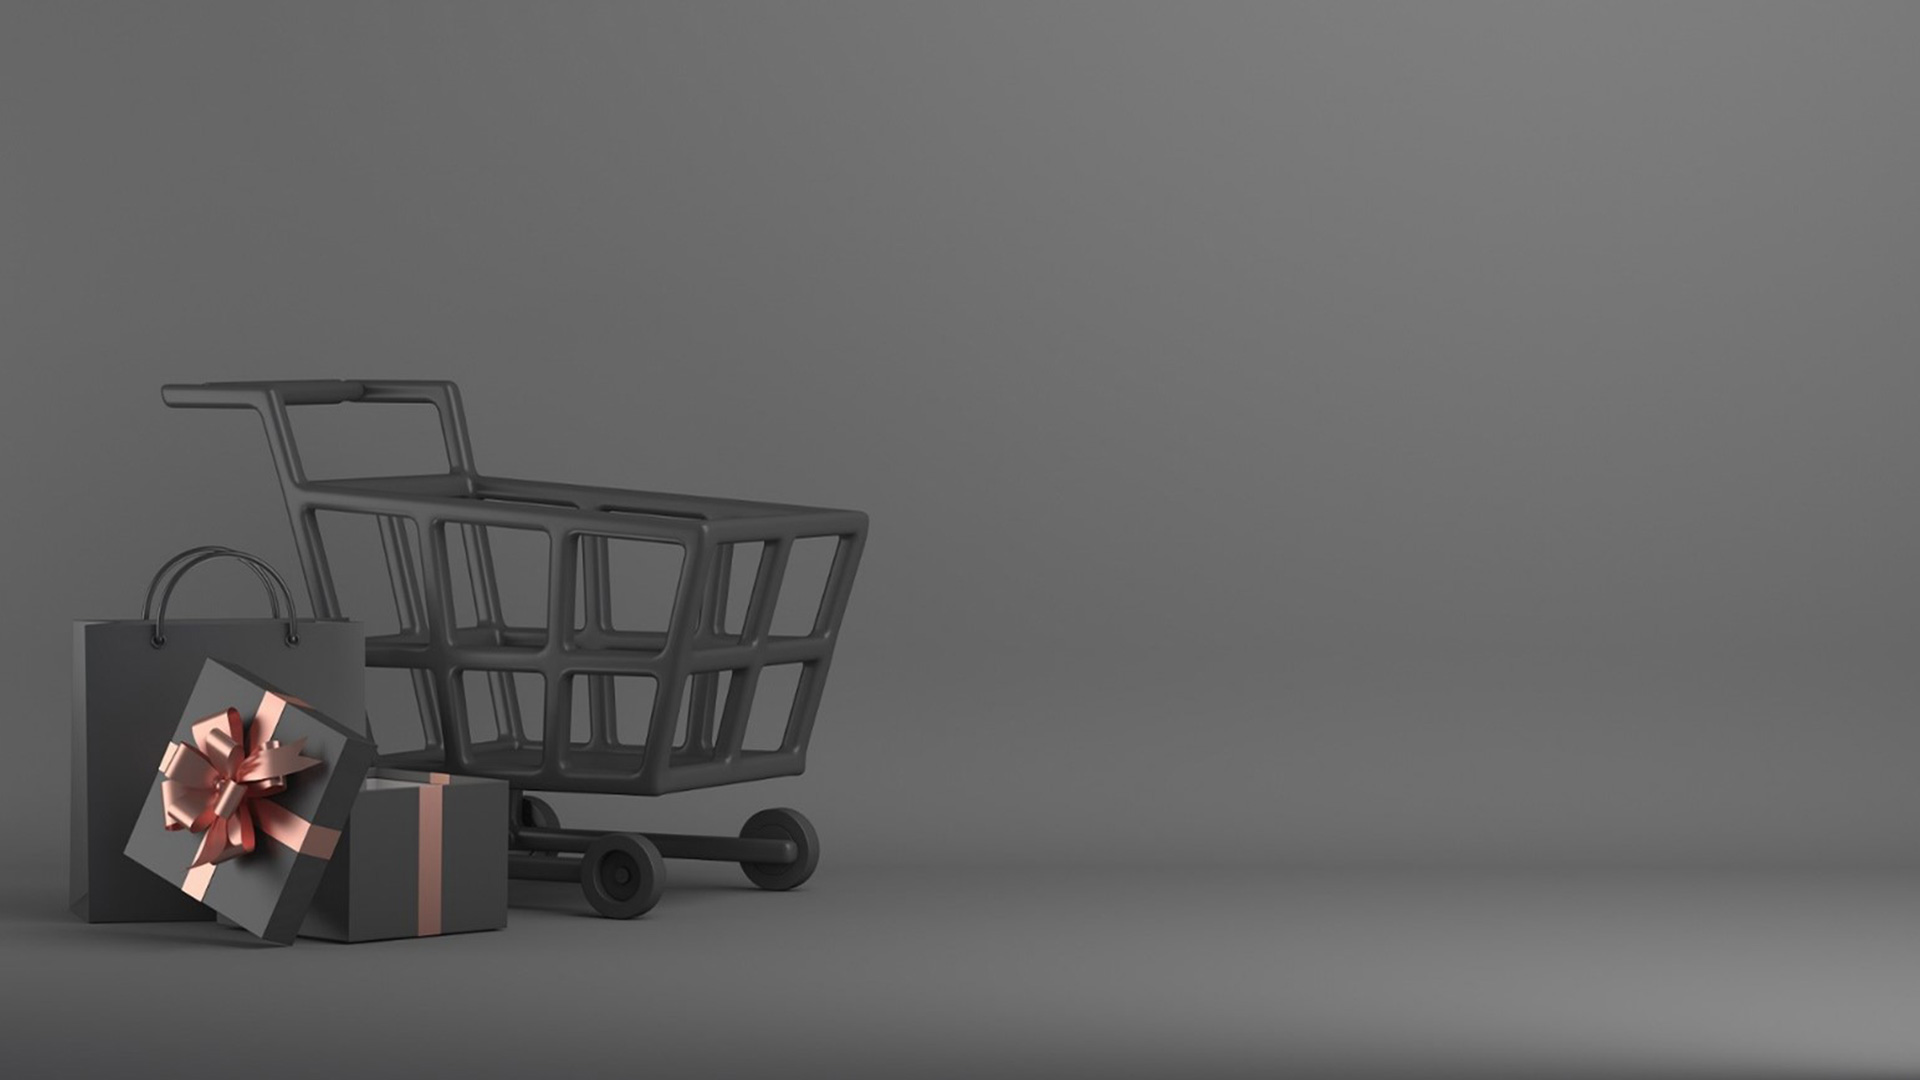 Gifts and trolley on a black background, black Friday concept